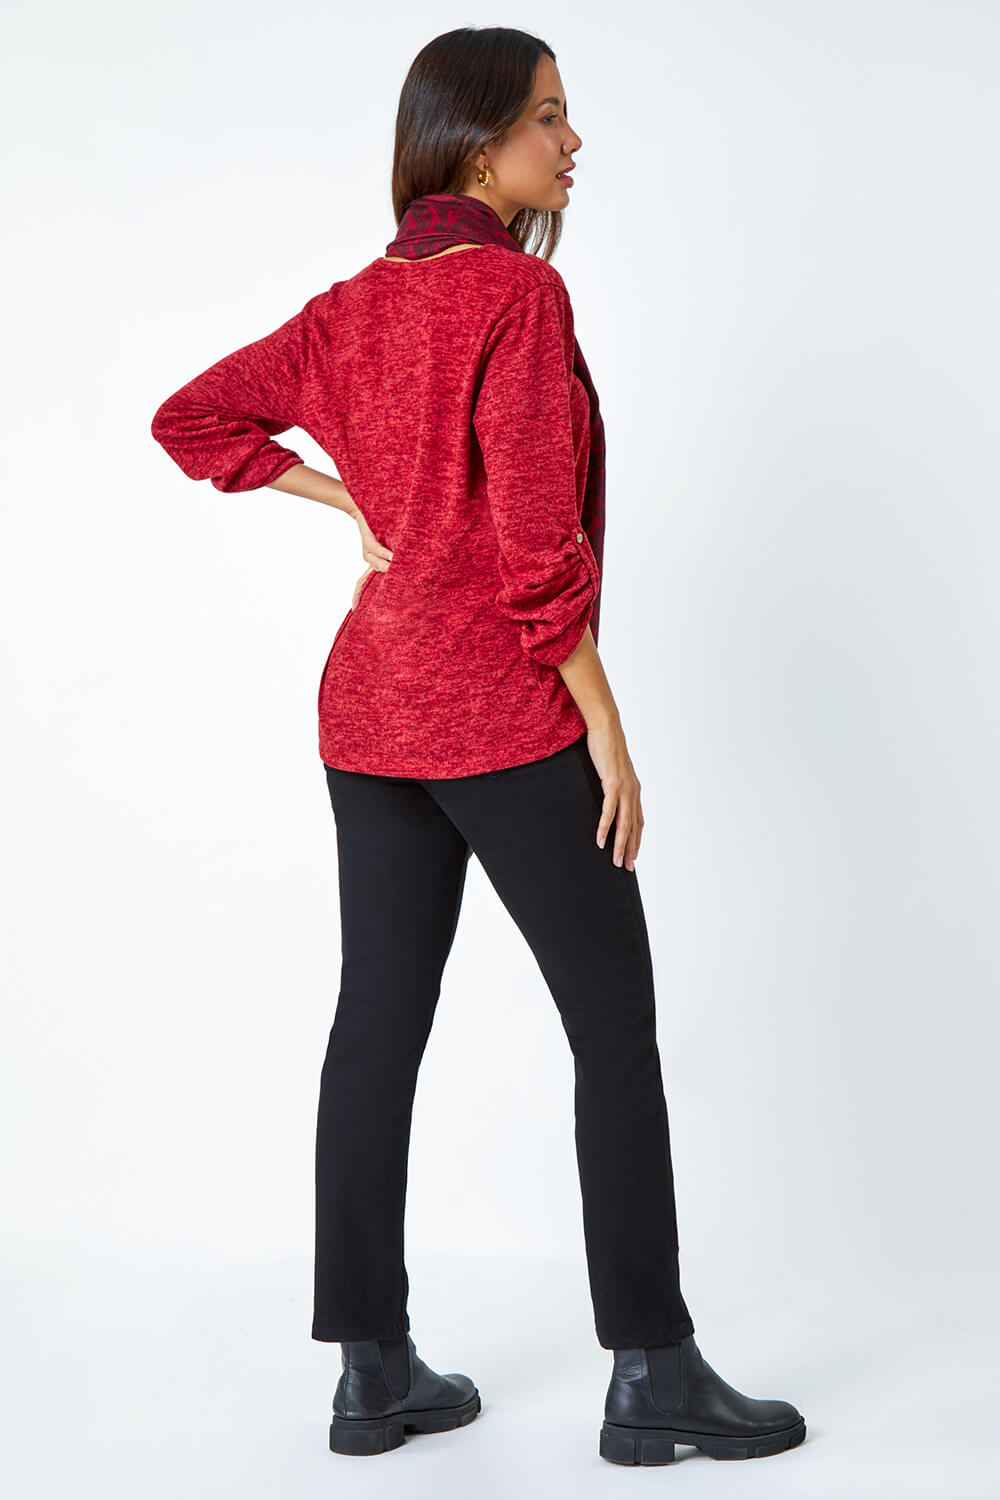 Red Stretch Top with Animal Print Scarf, Image 3 of 5